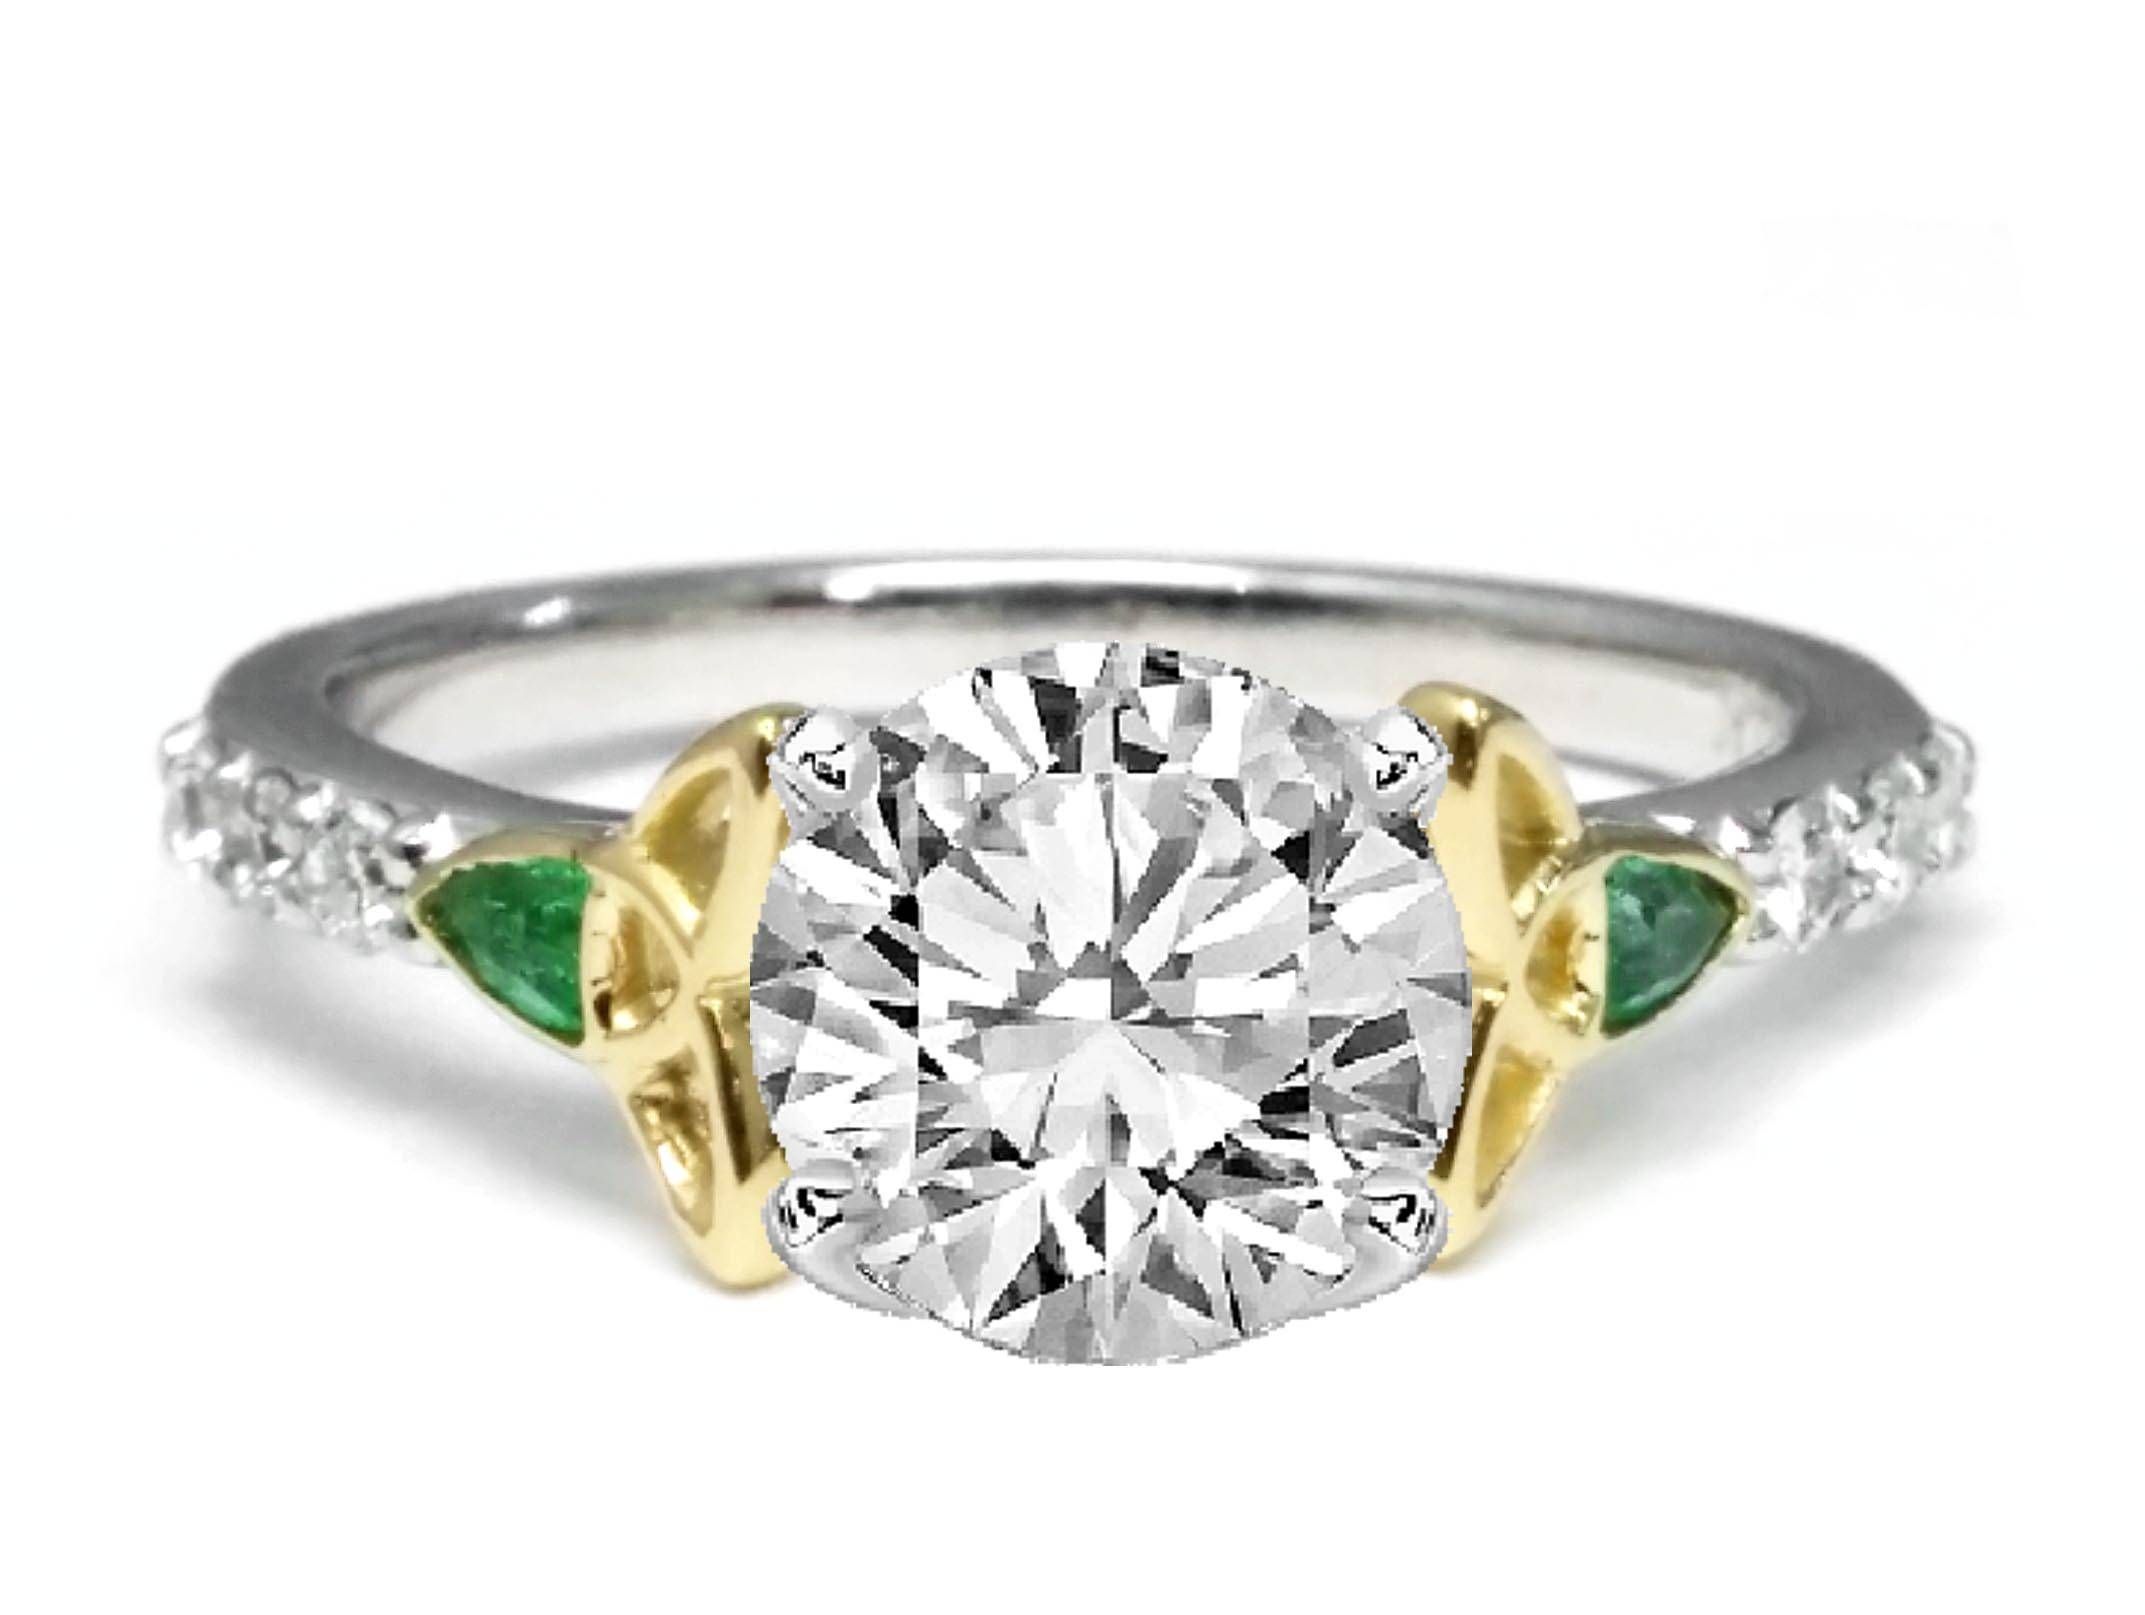 Celtic – Engagement Rings From Mdc Diamonds Nyc Throughout Vintage Irish Engagement Rings (View 4 of 15)